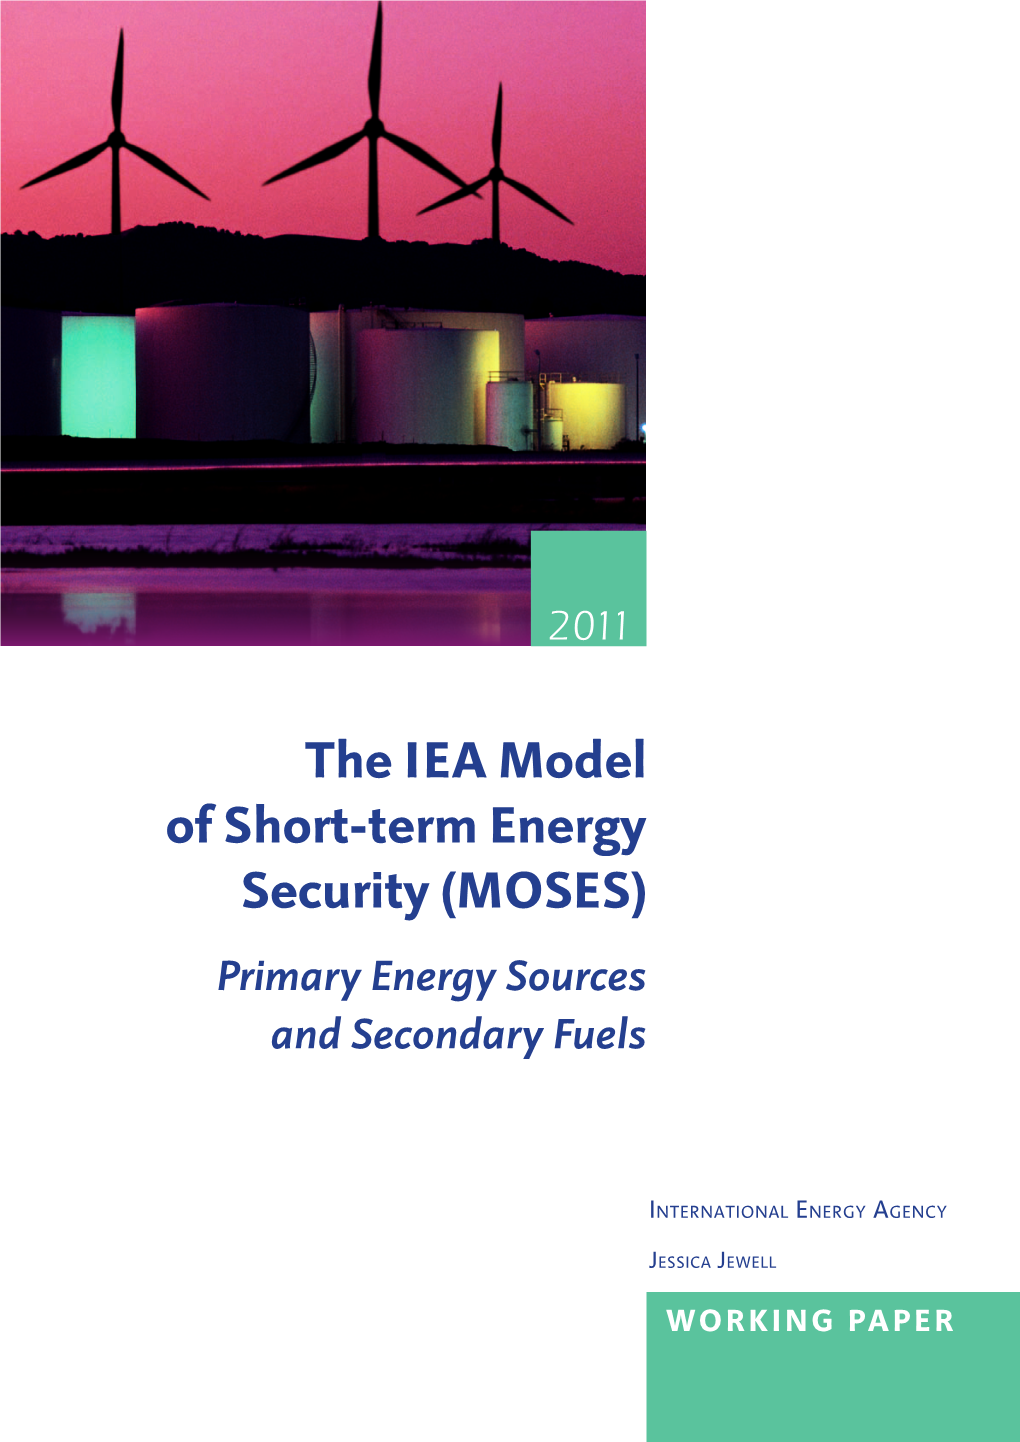 The IEA Model of Short-Term Energy Security (MOSES) Primary Energy Sources and Secondary Fuels